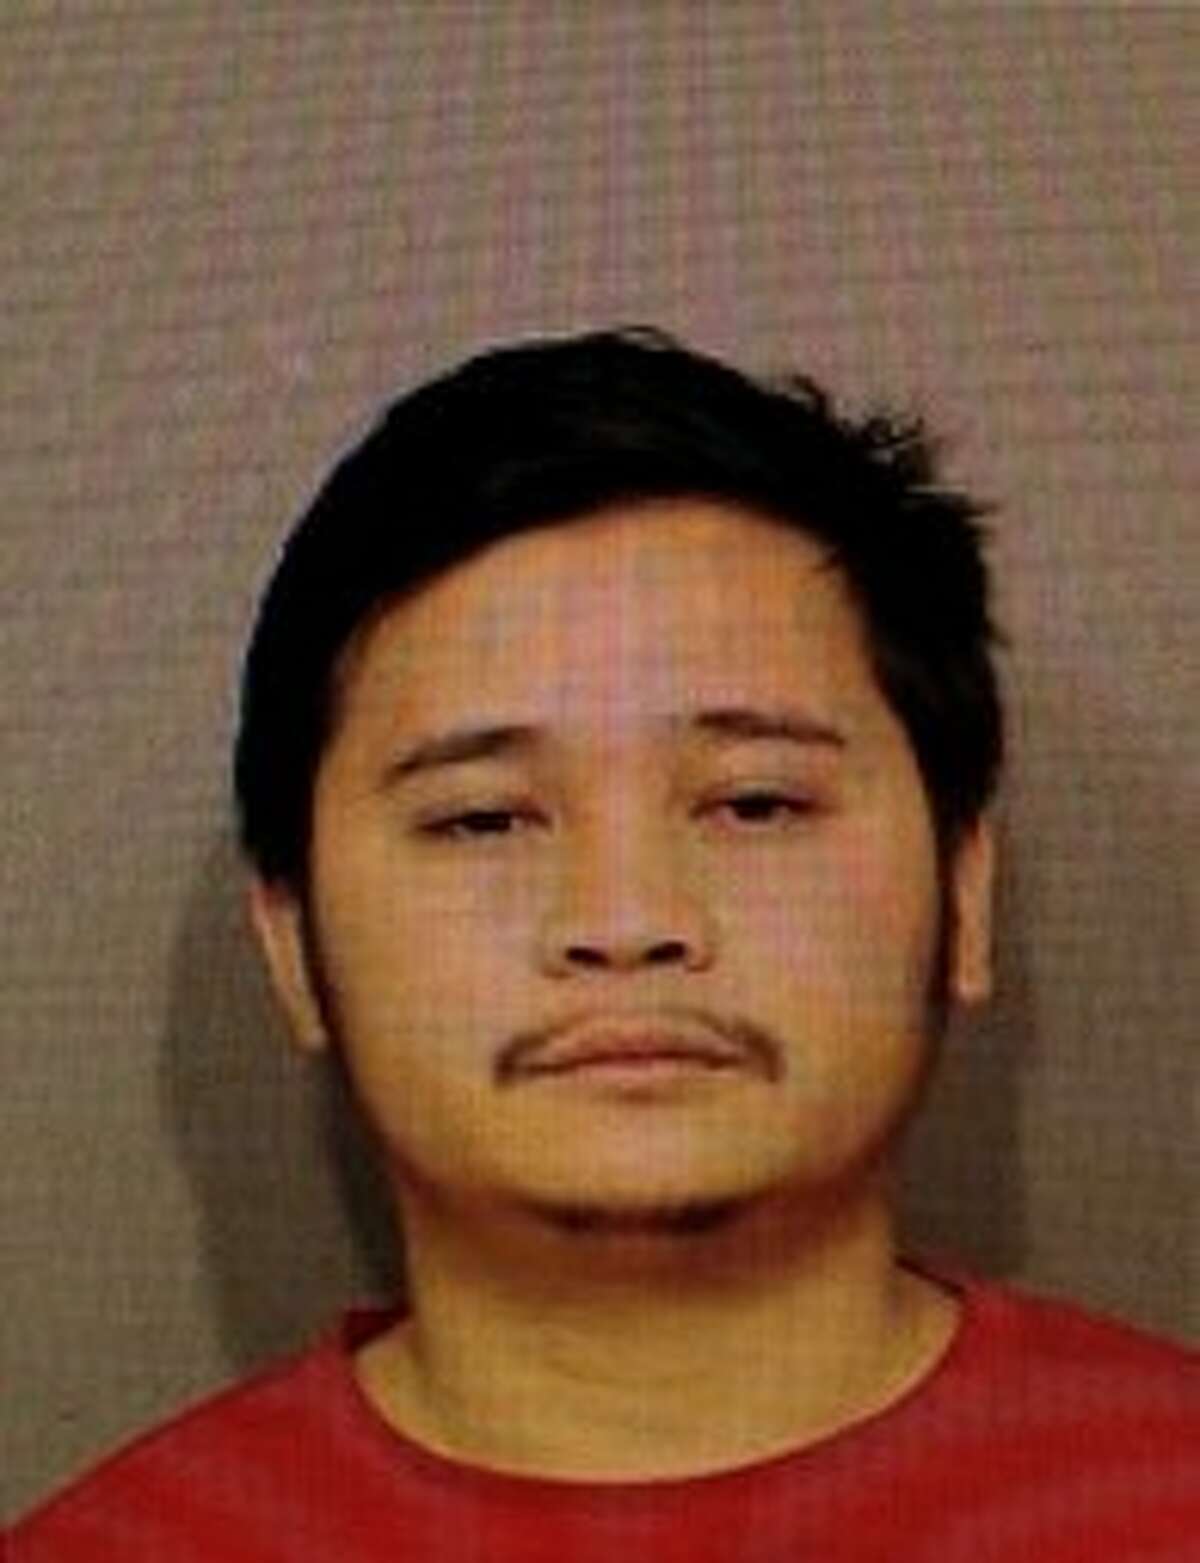 Moo Ta, 24, of Hartford, sexually assaulted a woman on East River Drive on Jan. 15 before posing as a cop during an incident with other women in the same area on Feb. 15, according to East Hartford police.